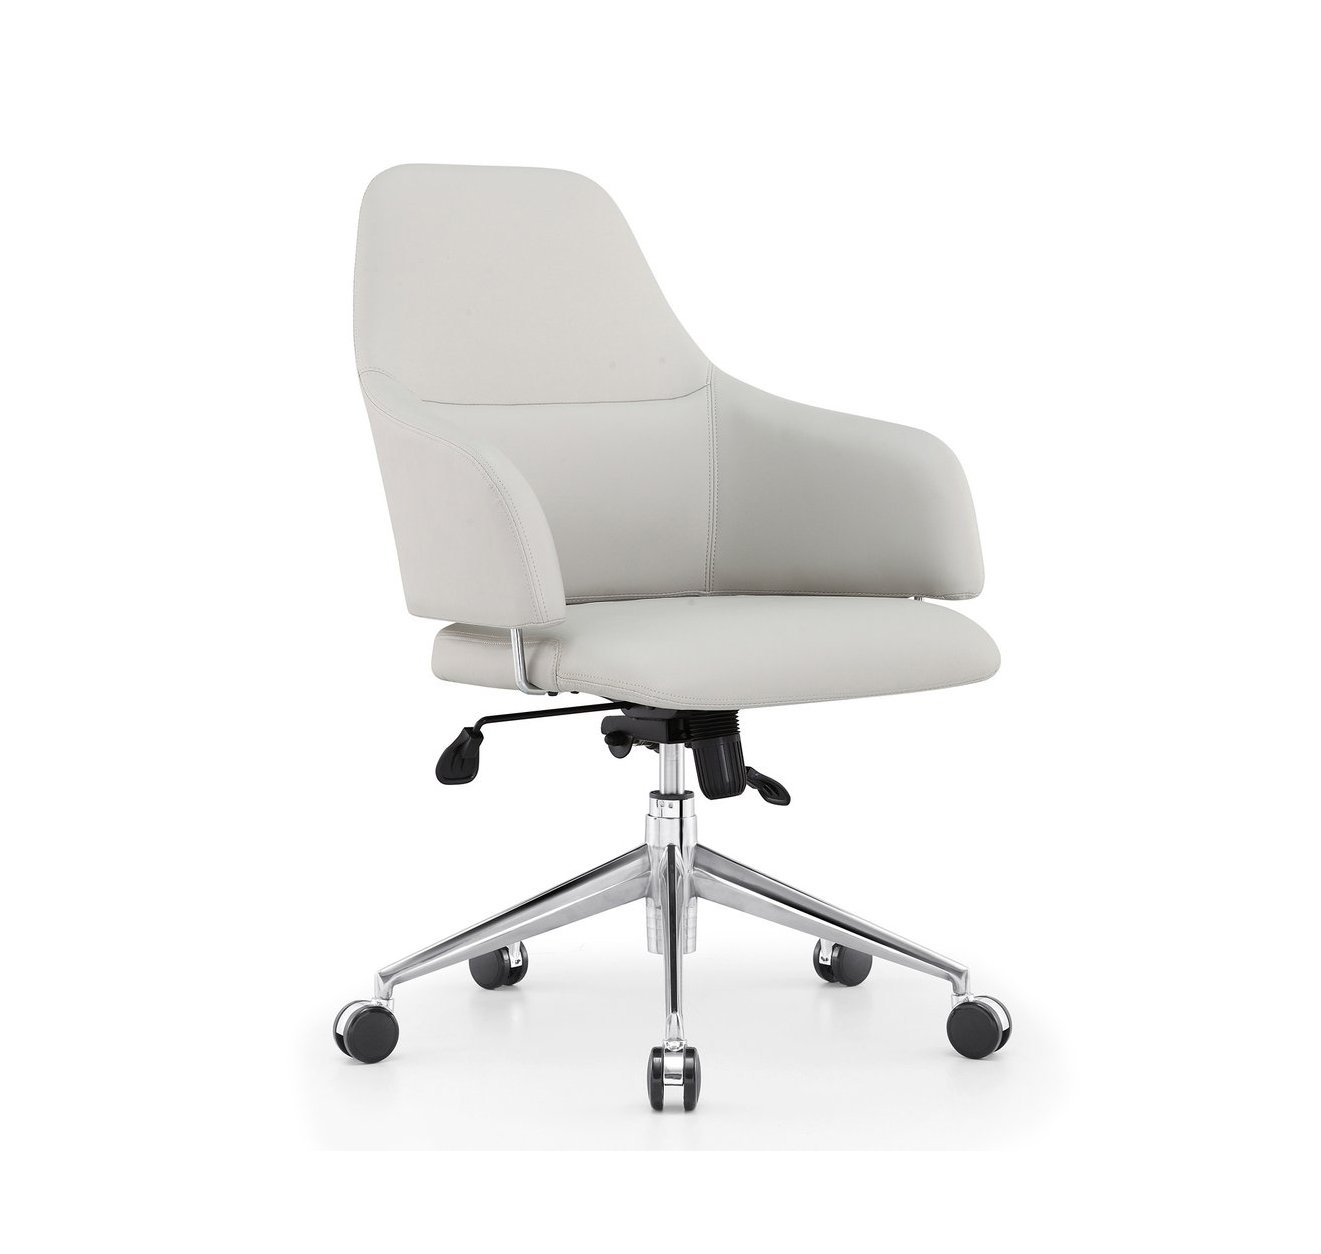 Canton management chair Furniture-Office-Office Chairs